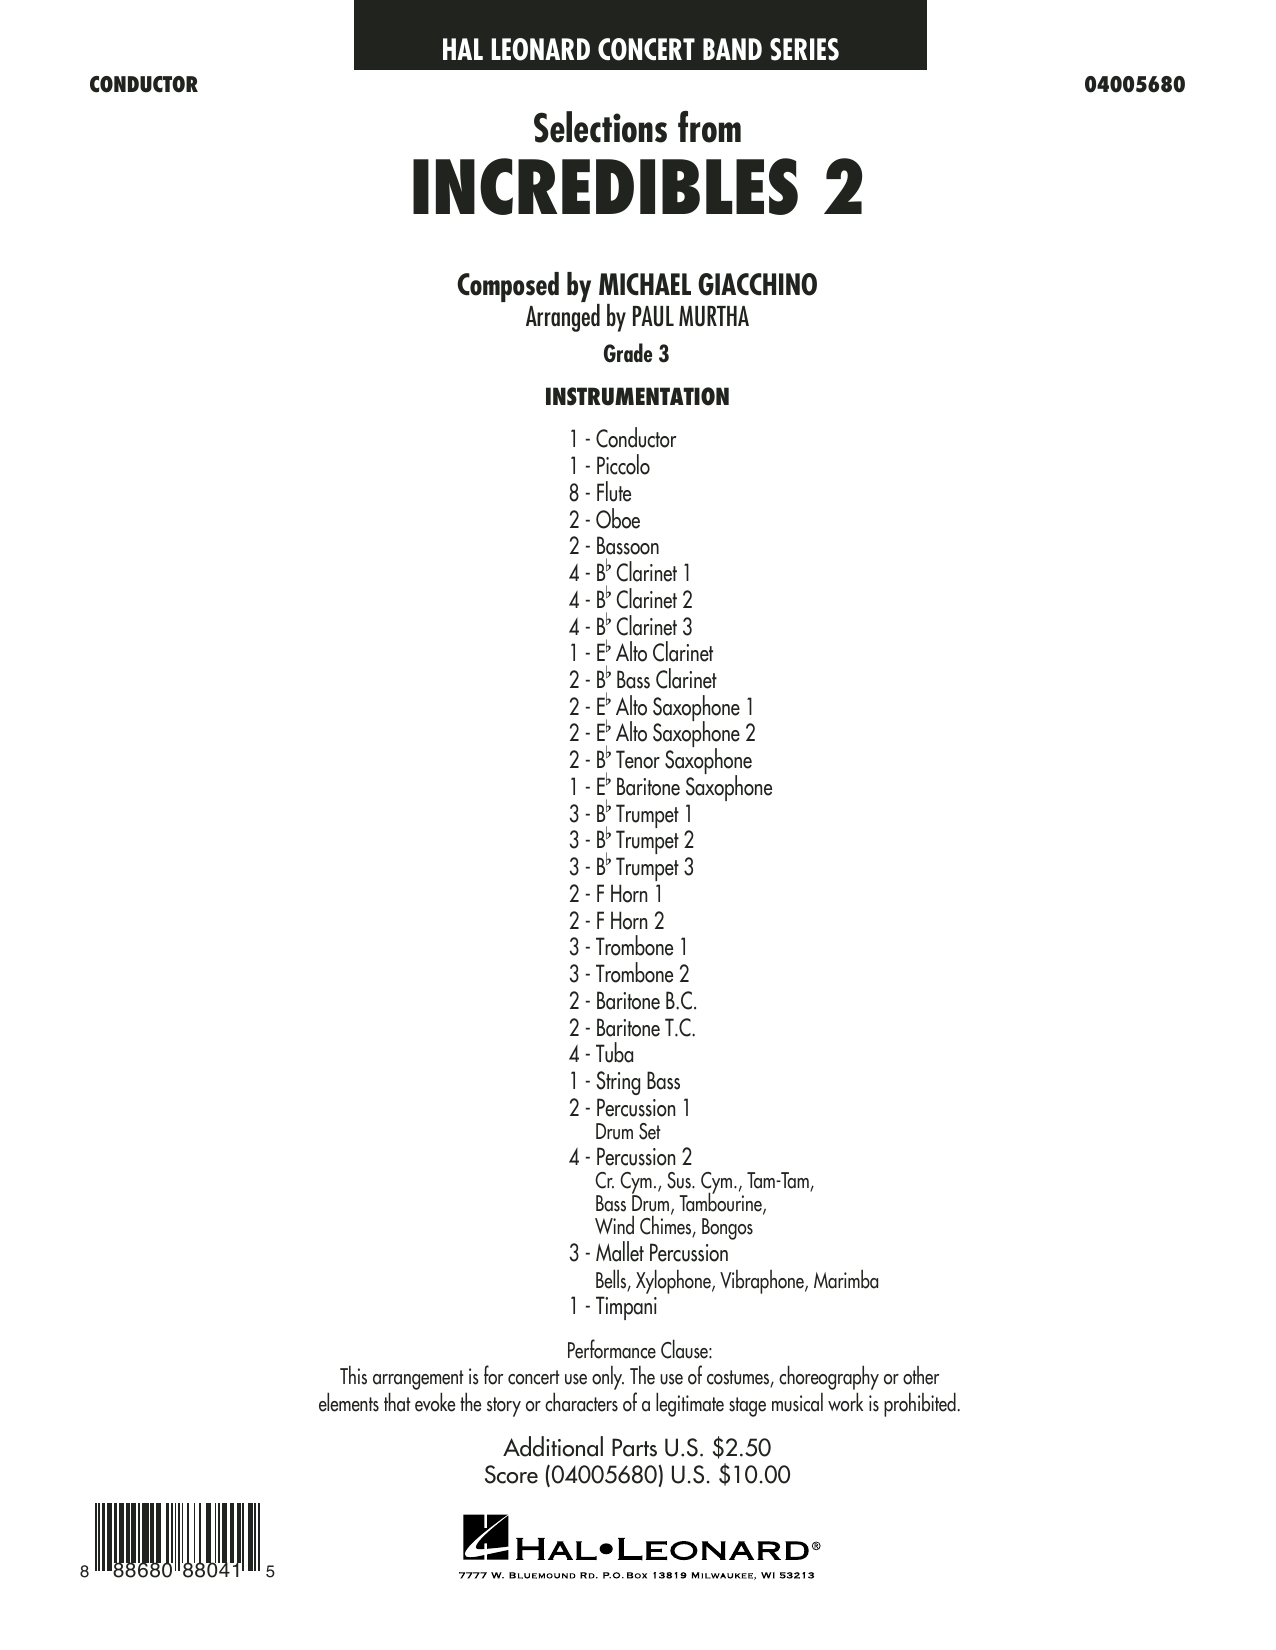 Michael Giacchino Selections from Incredibles 2 (arr. Paul Murtha) - Conductor Score (Full Score) sheet music preview music notes and score for Concert Band including 34 page(s)